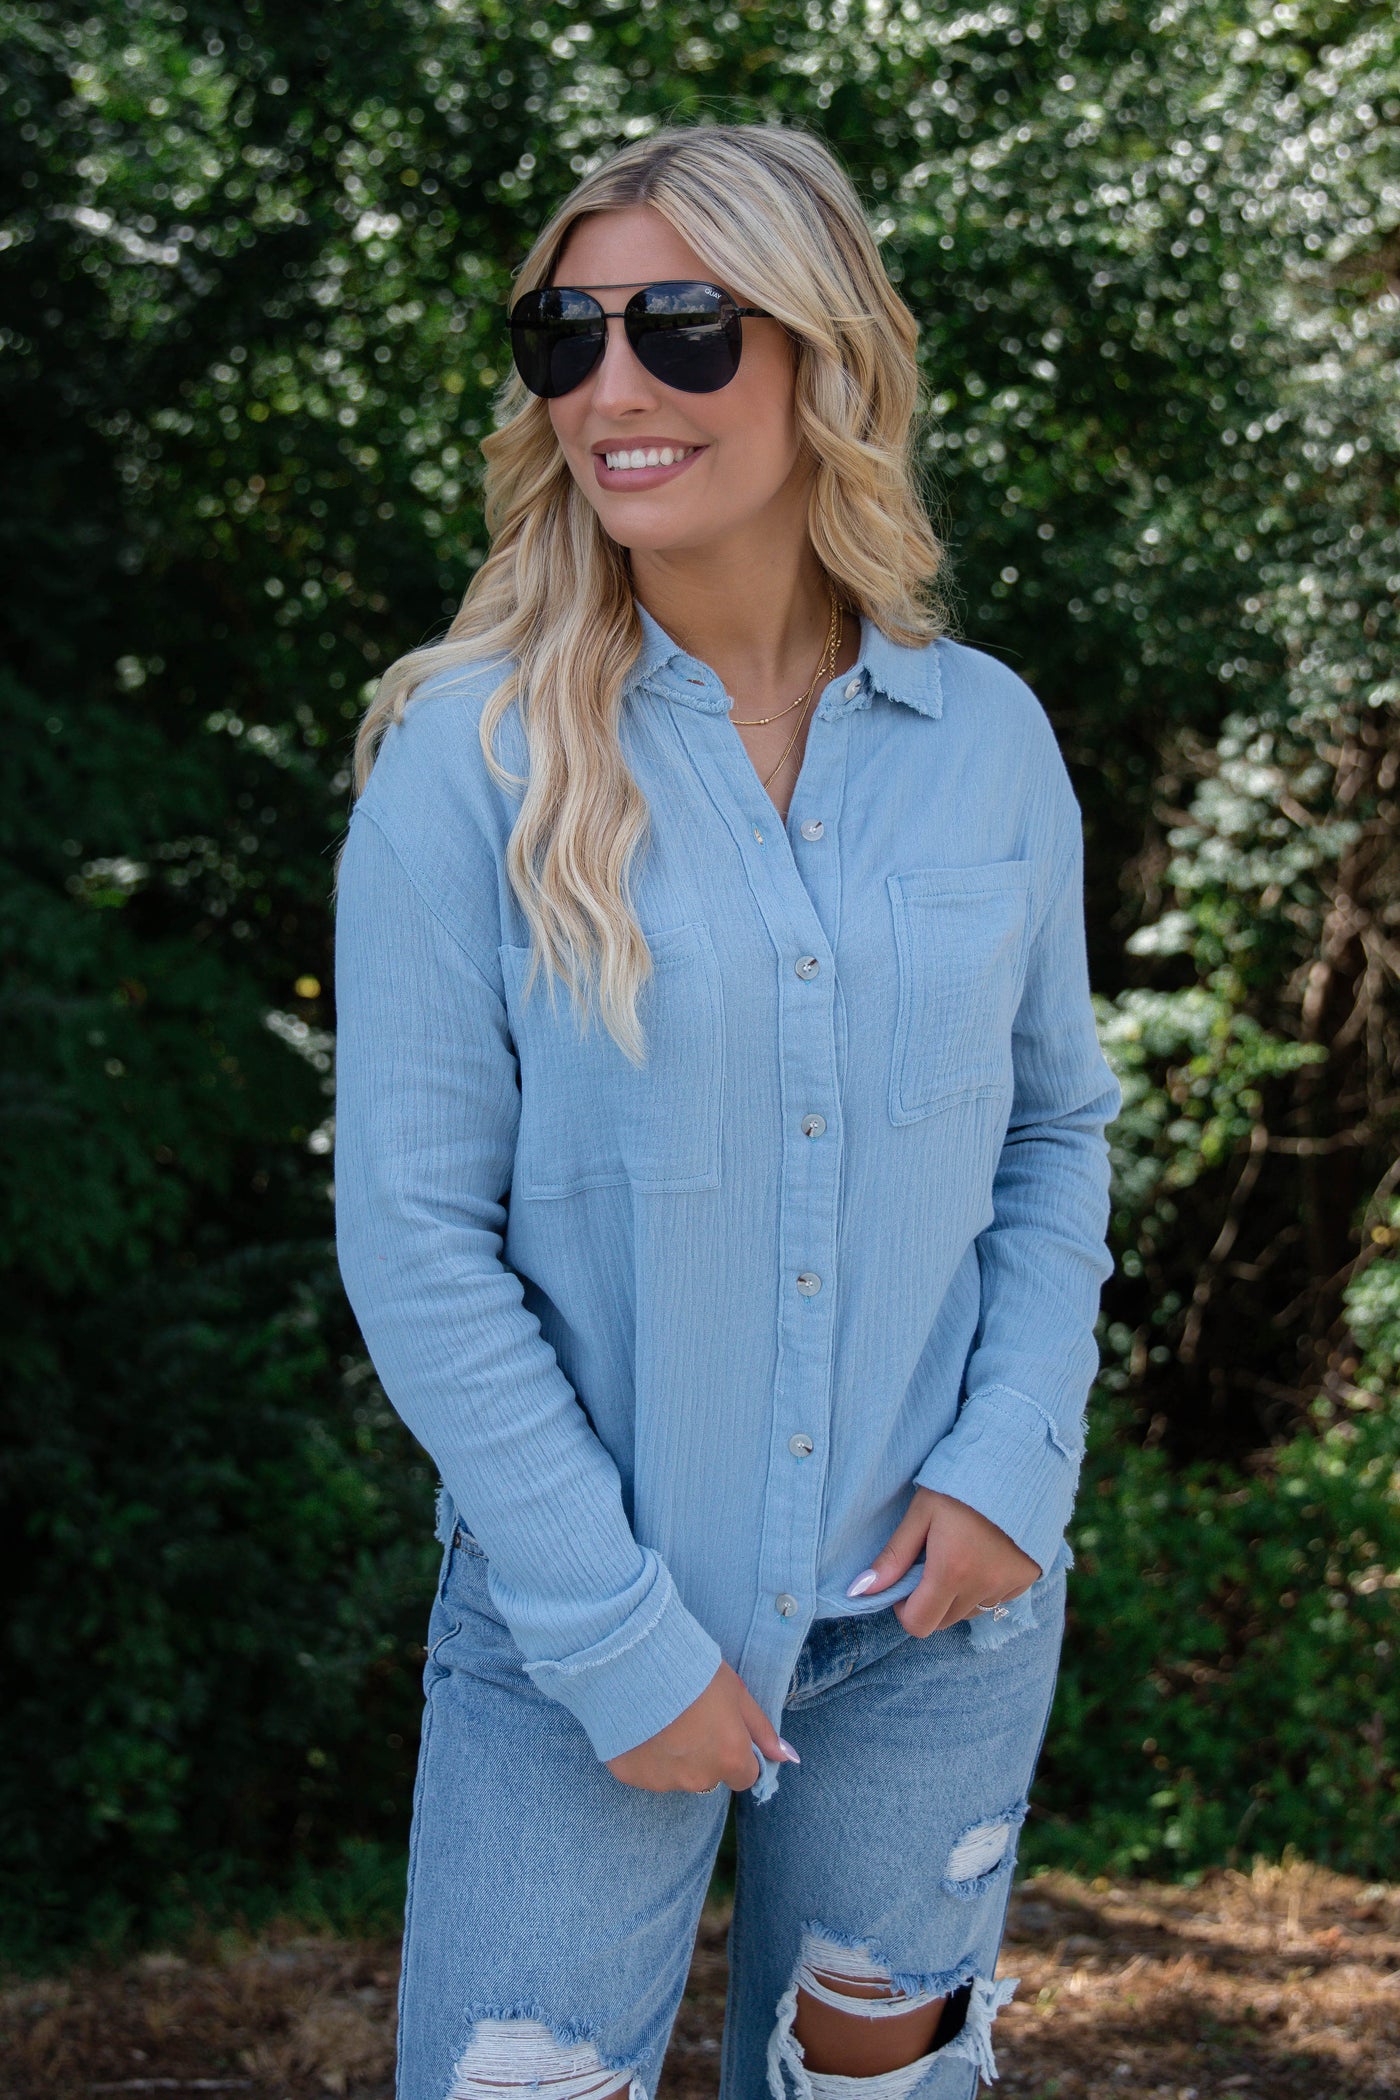 Women's Blue Button Down- Cotton Button Down Top- Casual Top With Pockets